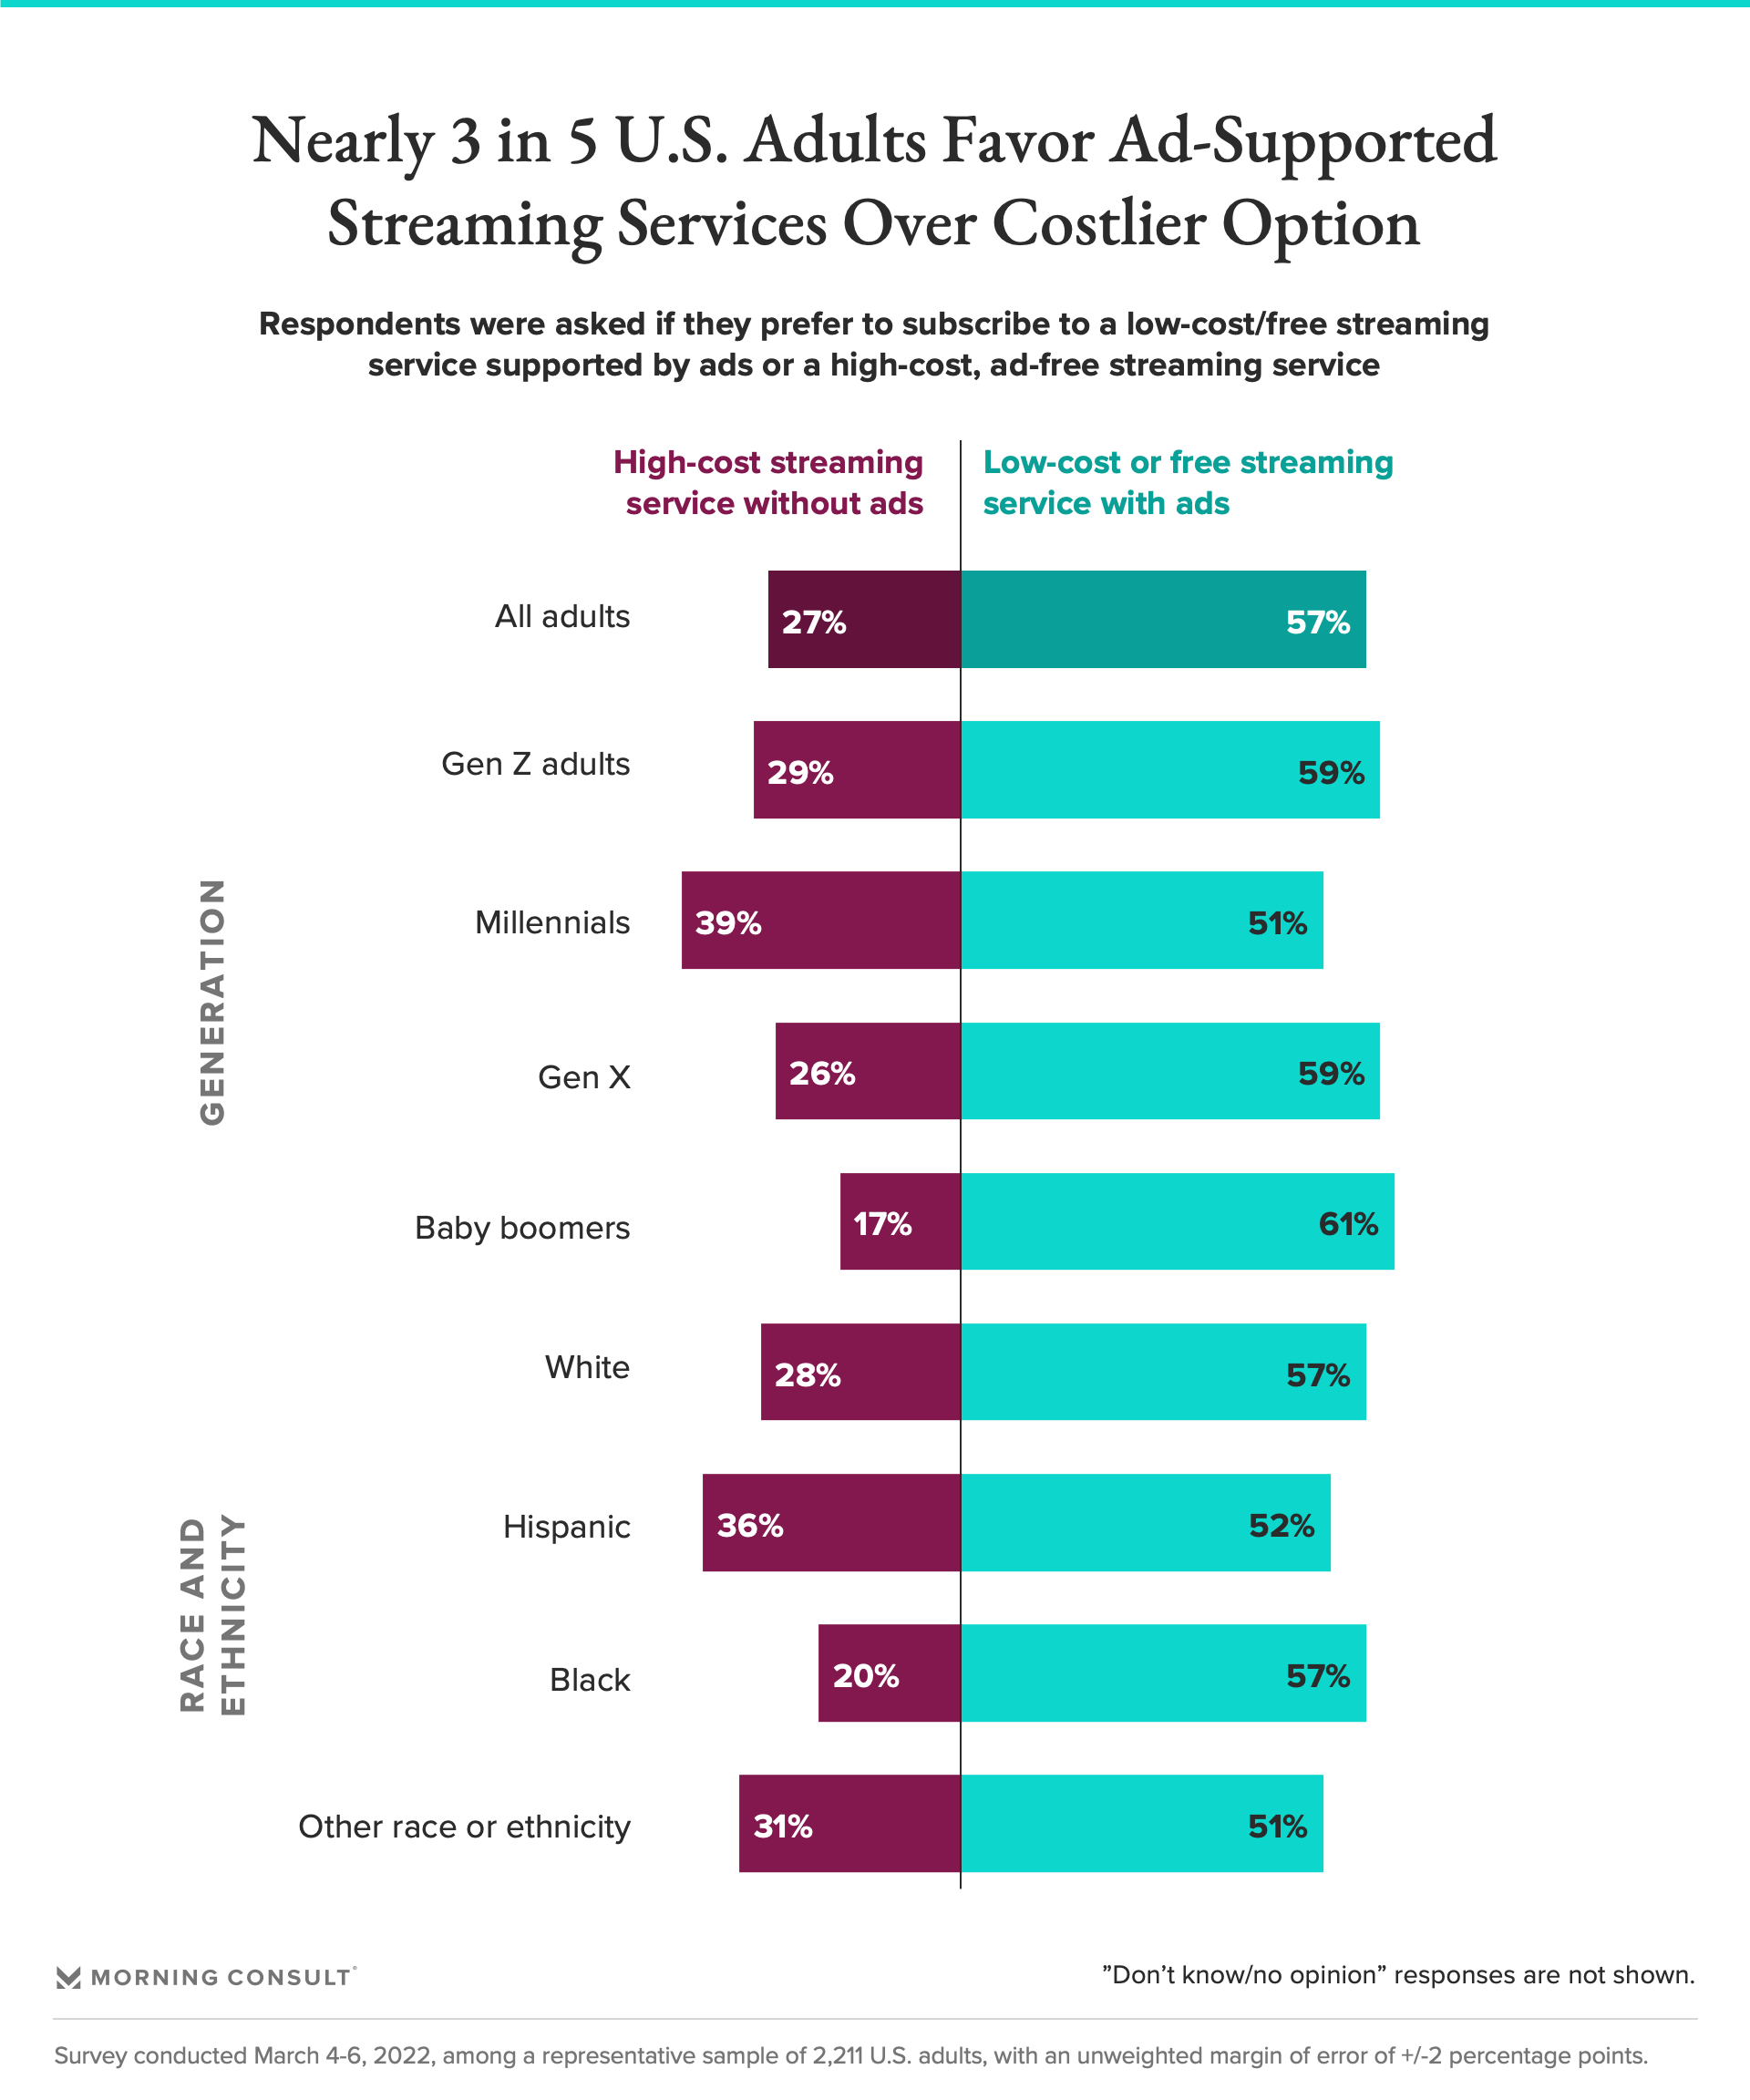 Butterfly chart showing favorability of ad-supported streaming services over costlier options among U.S. adults